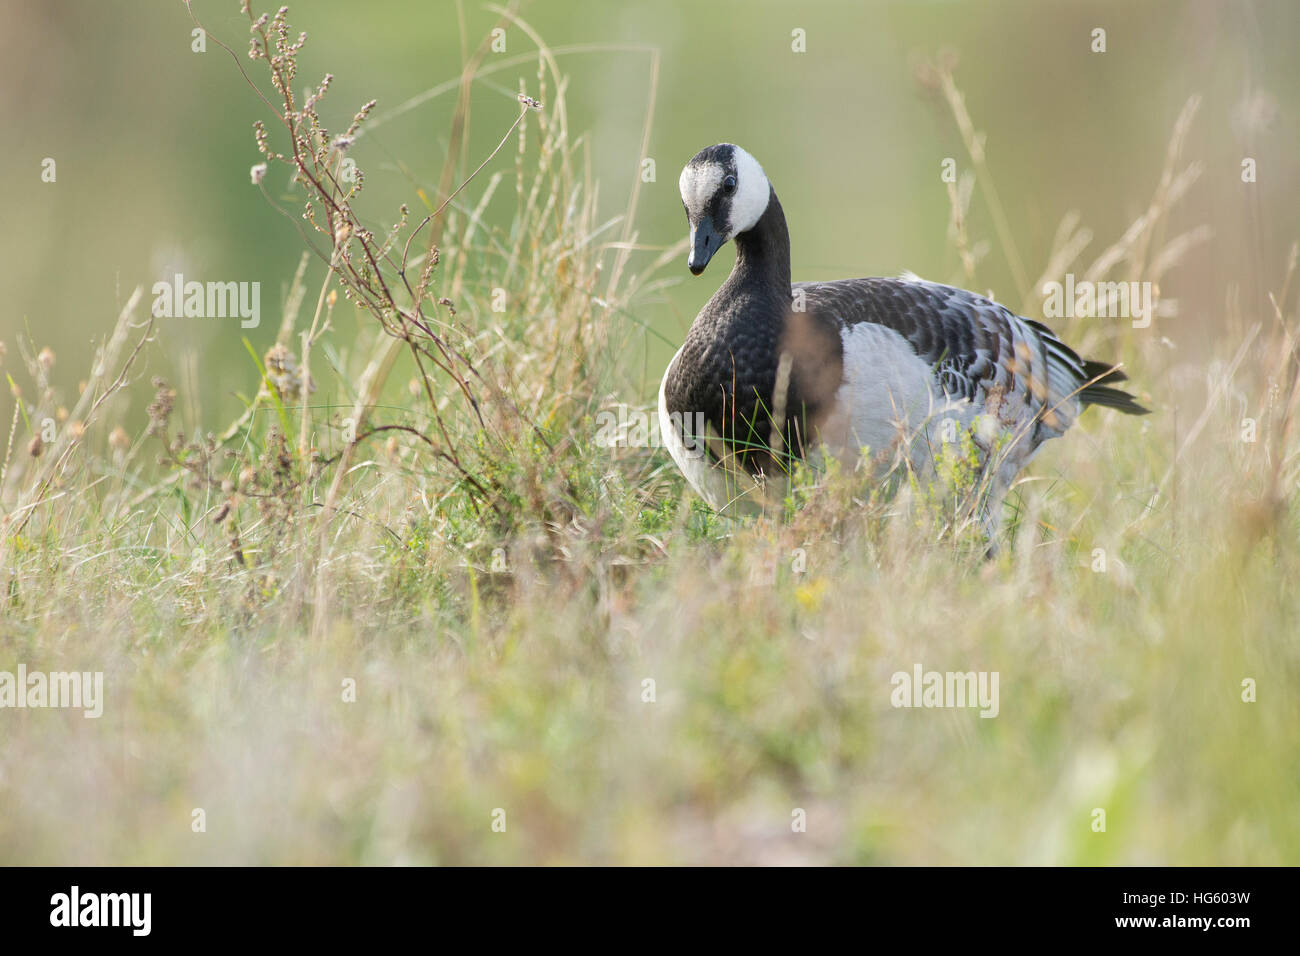 Barnacle goose in the grass Stock Photo